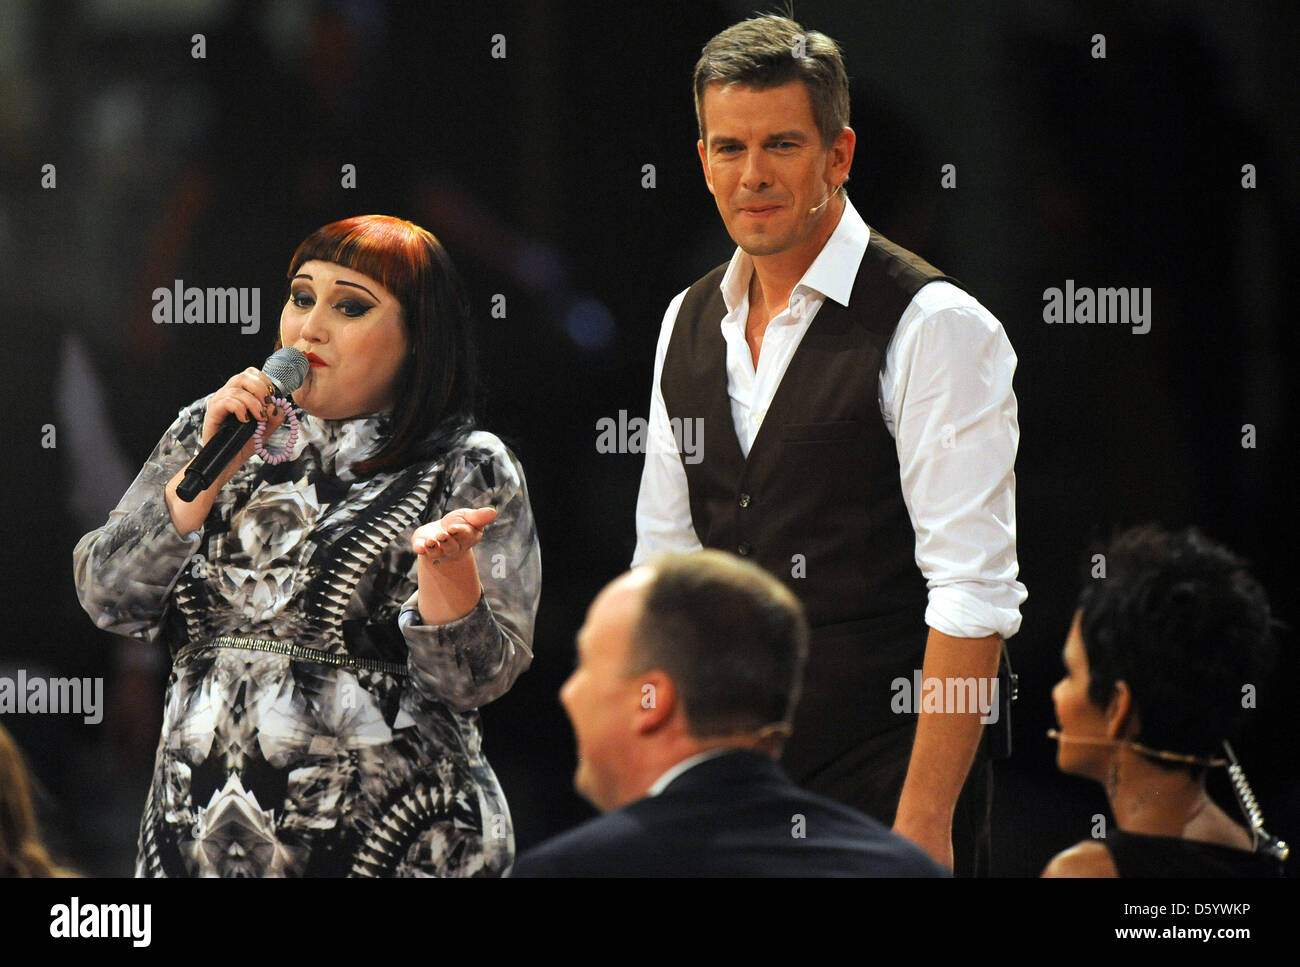 US Singer Beth Ditto Gossip performs during  the German television game shows 'Wetten, dass...? (Wannna best...?), in Bremen, Germany, 3 November 2012. Photo: Ingo Wagner Stock Photo